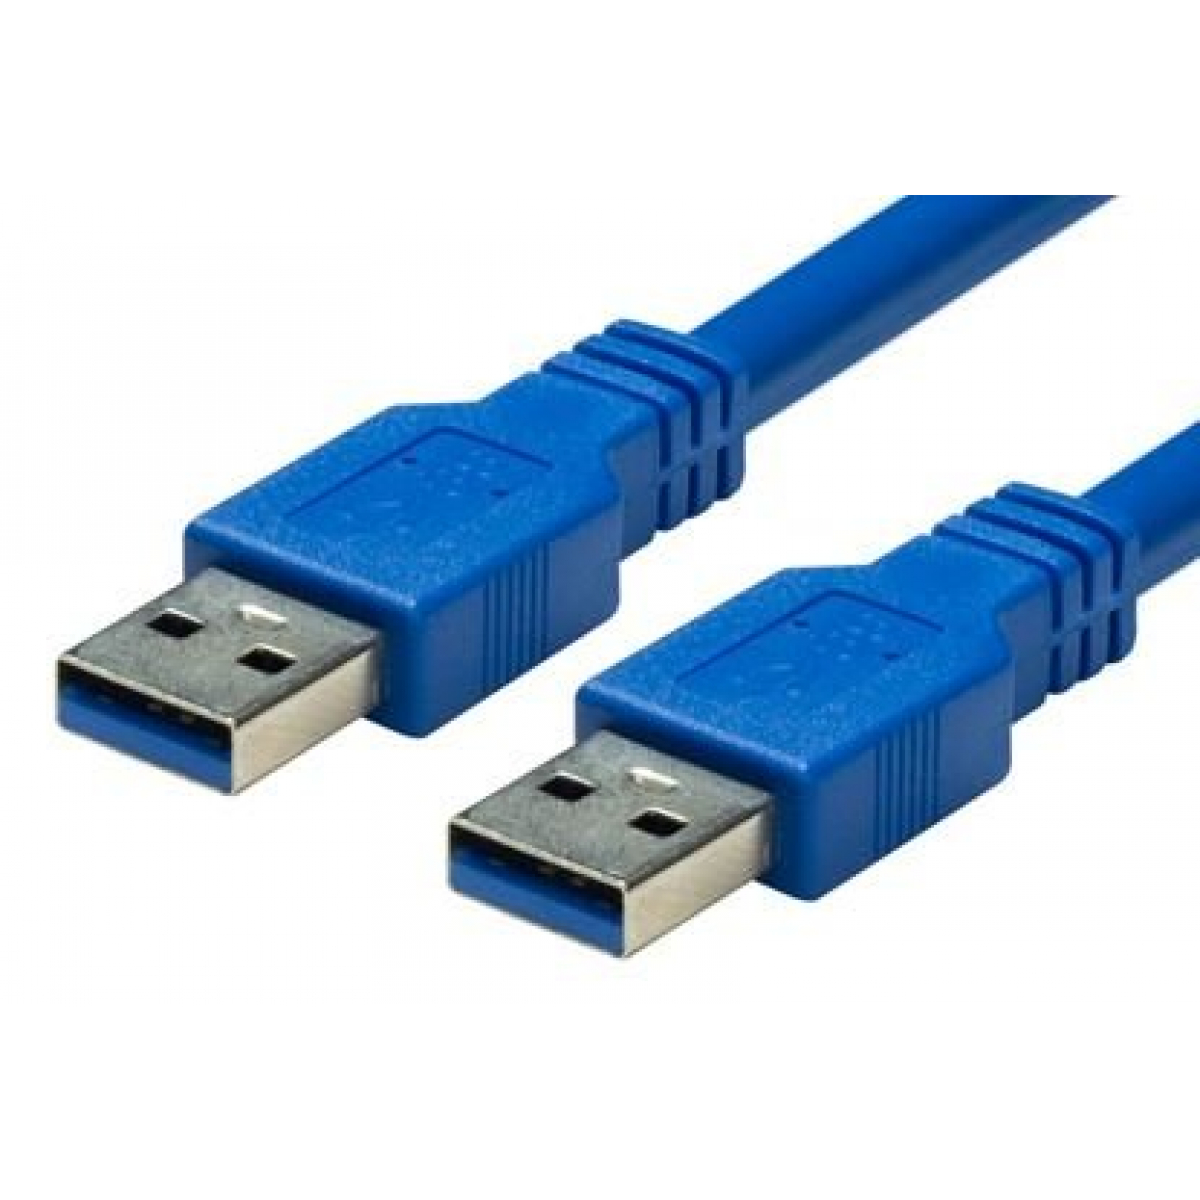 DYNAMIX 1m USB 3.0 USB-A MALE TO MALE CABLE